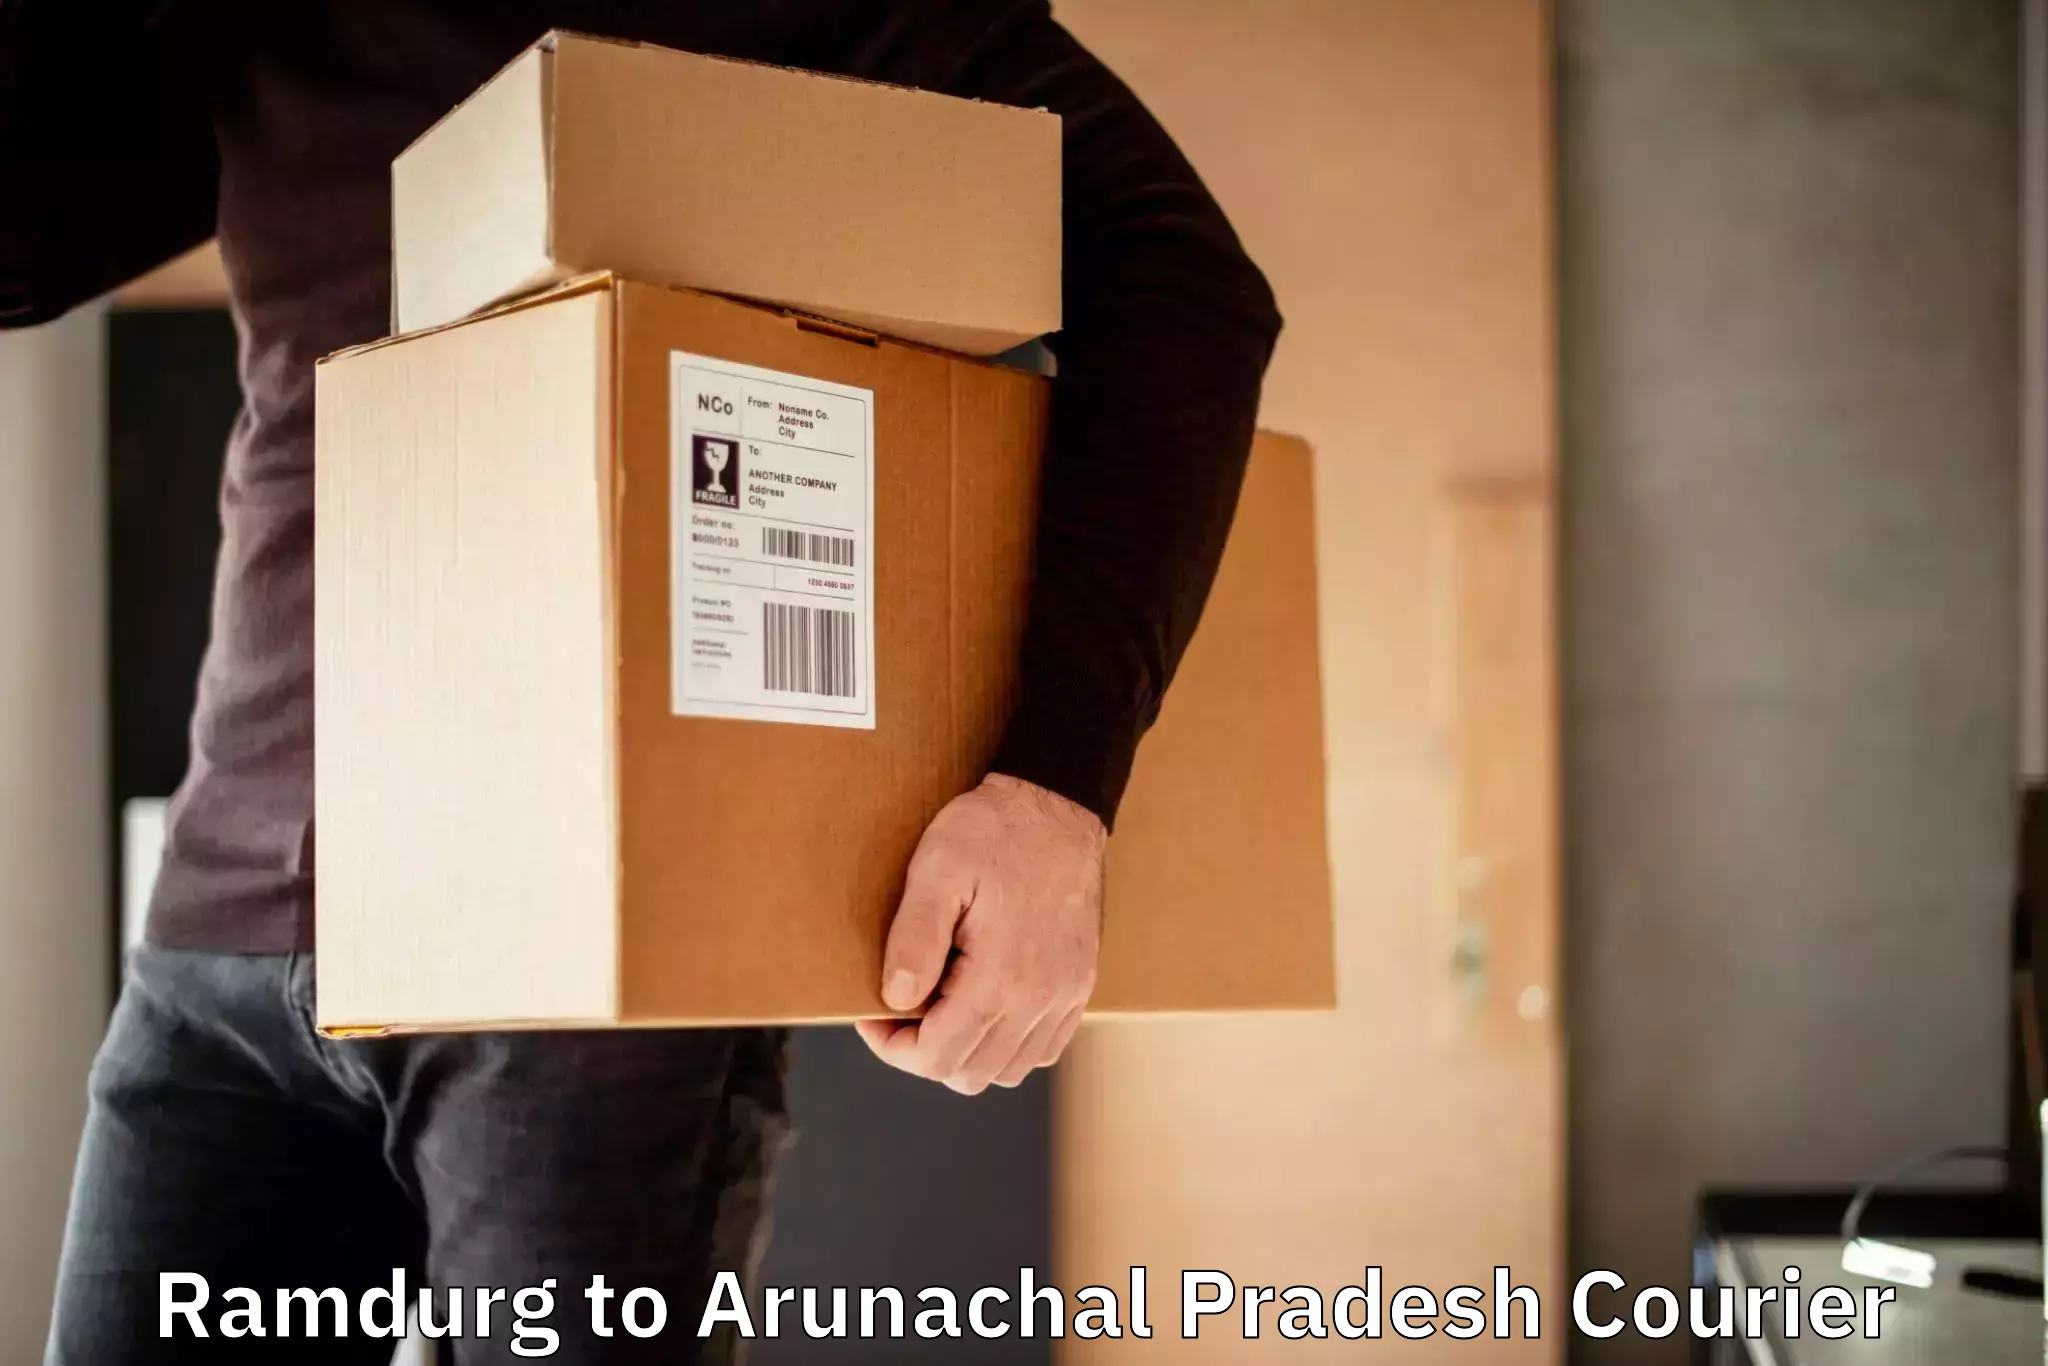 State-of-the-art courier technology Ramdurg to Namsai